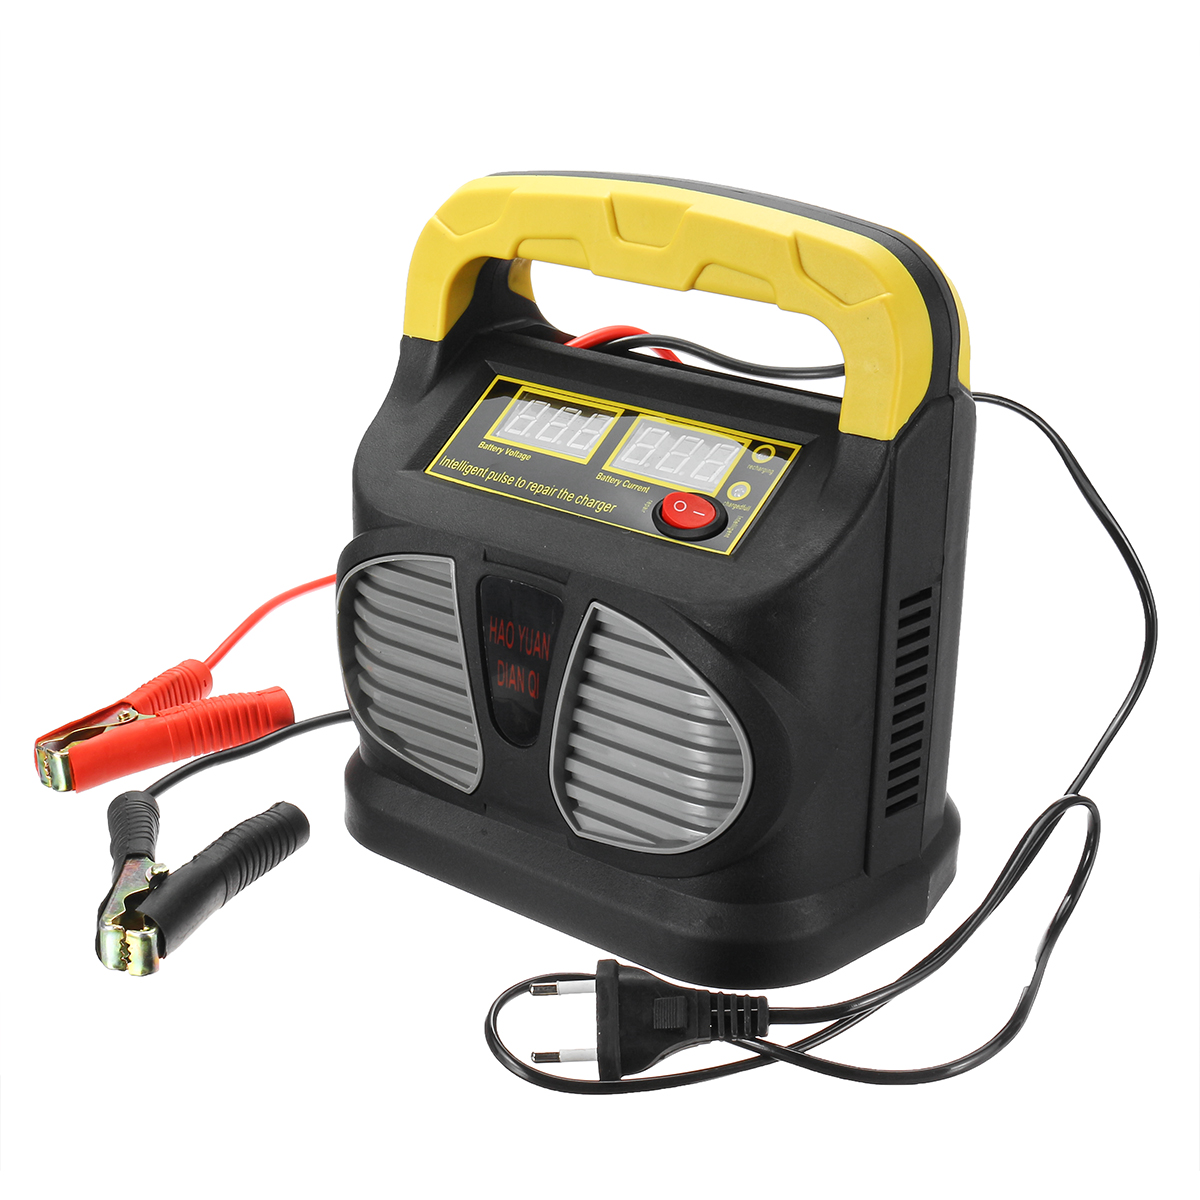 

240W 12V/24V 6-200AH Battery Charger For Lead Storage Battery Auto Charger Jump Starter Power Bank